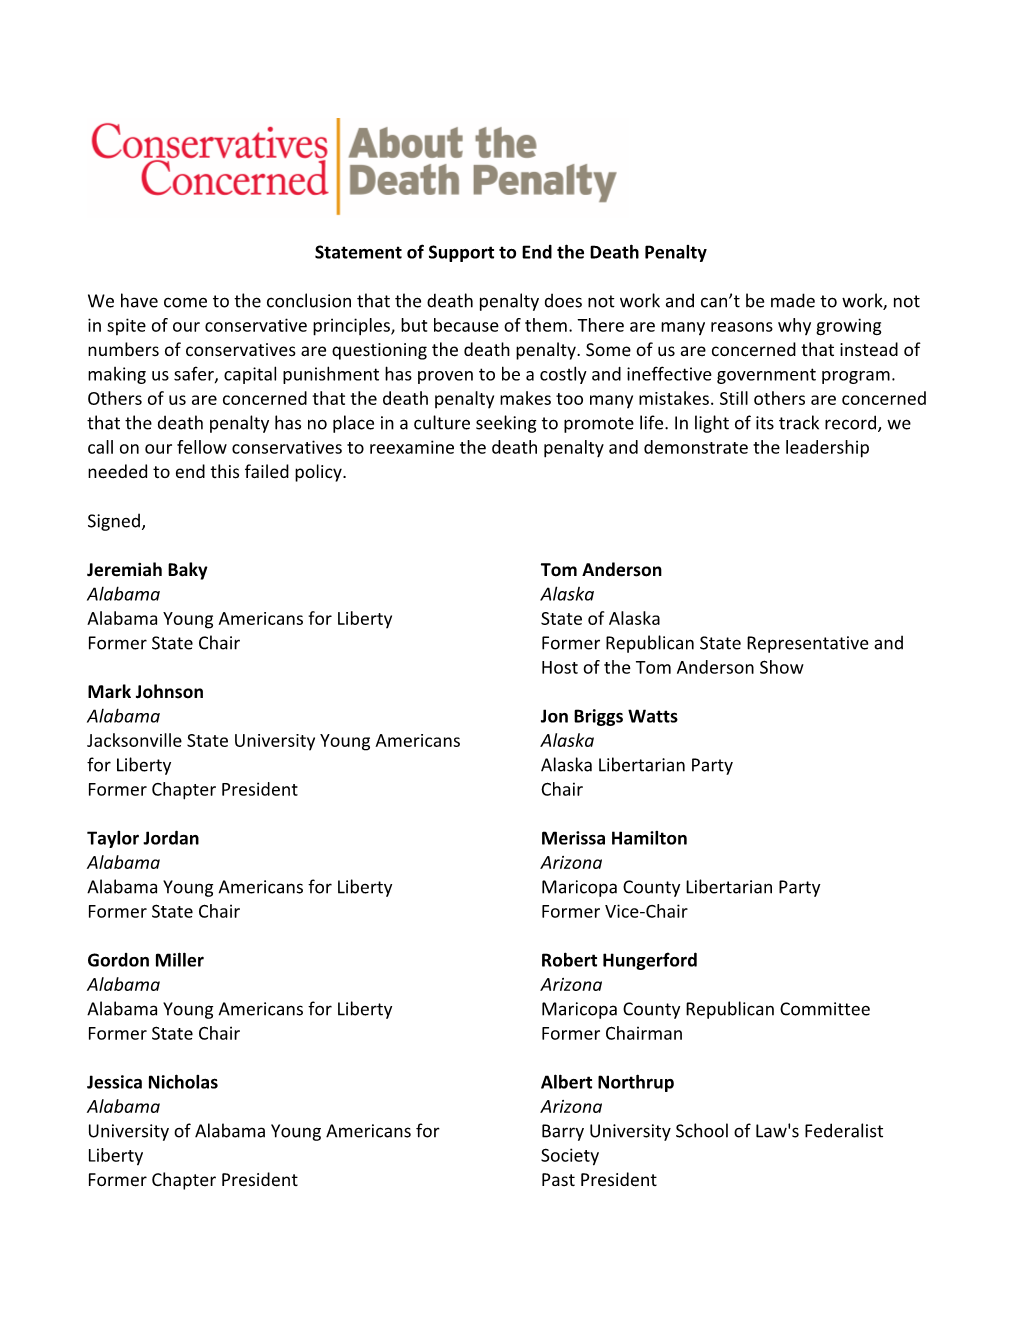 Conservative Statement to End Death Penalty with 250+ Signatories